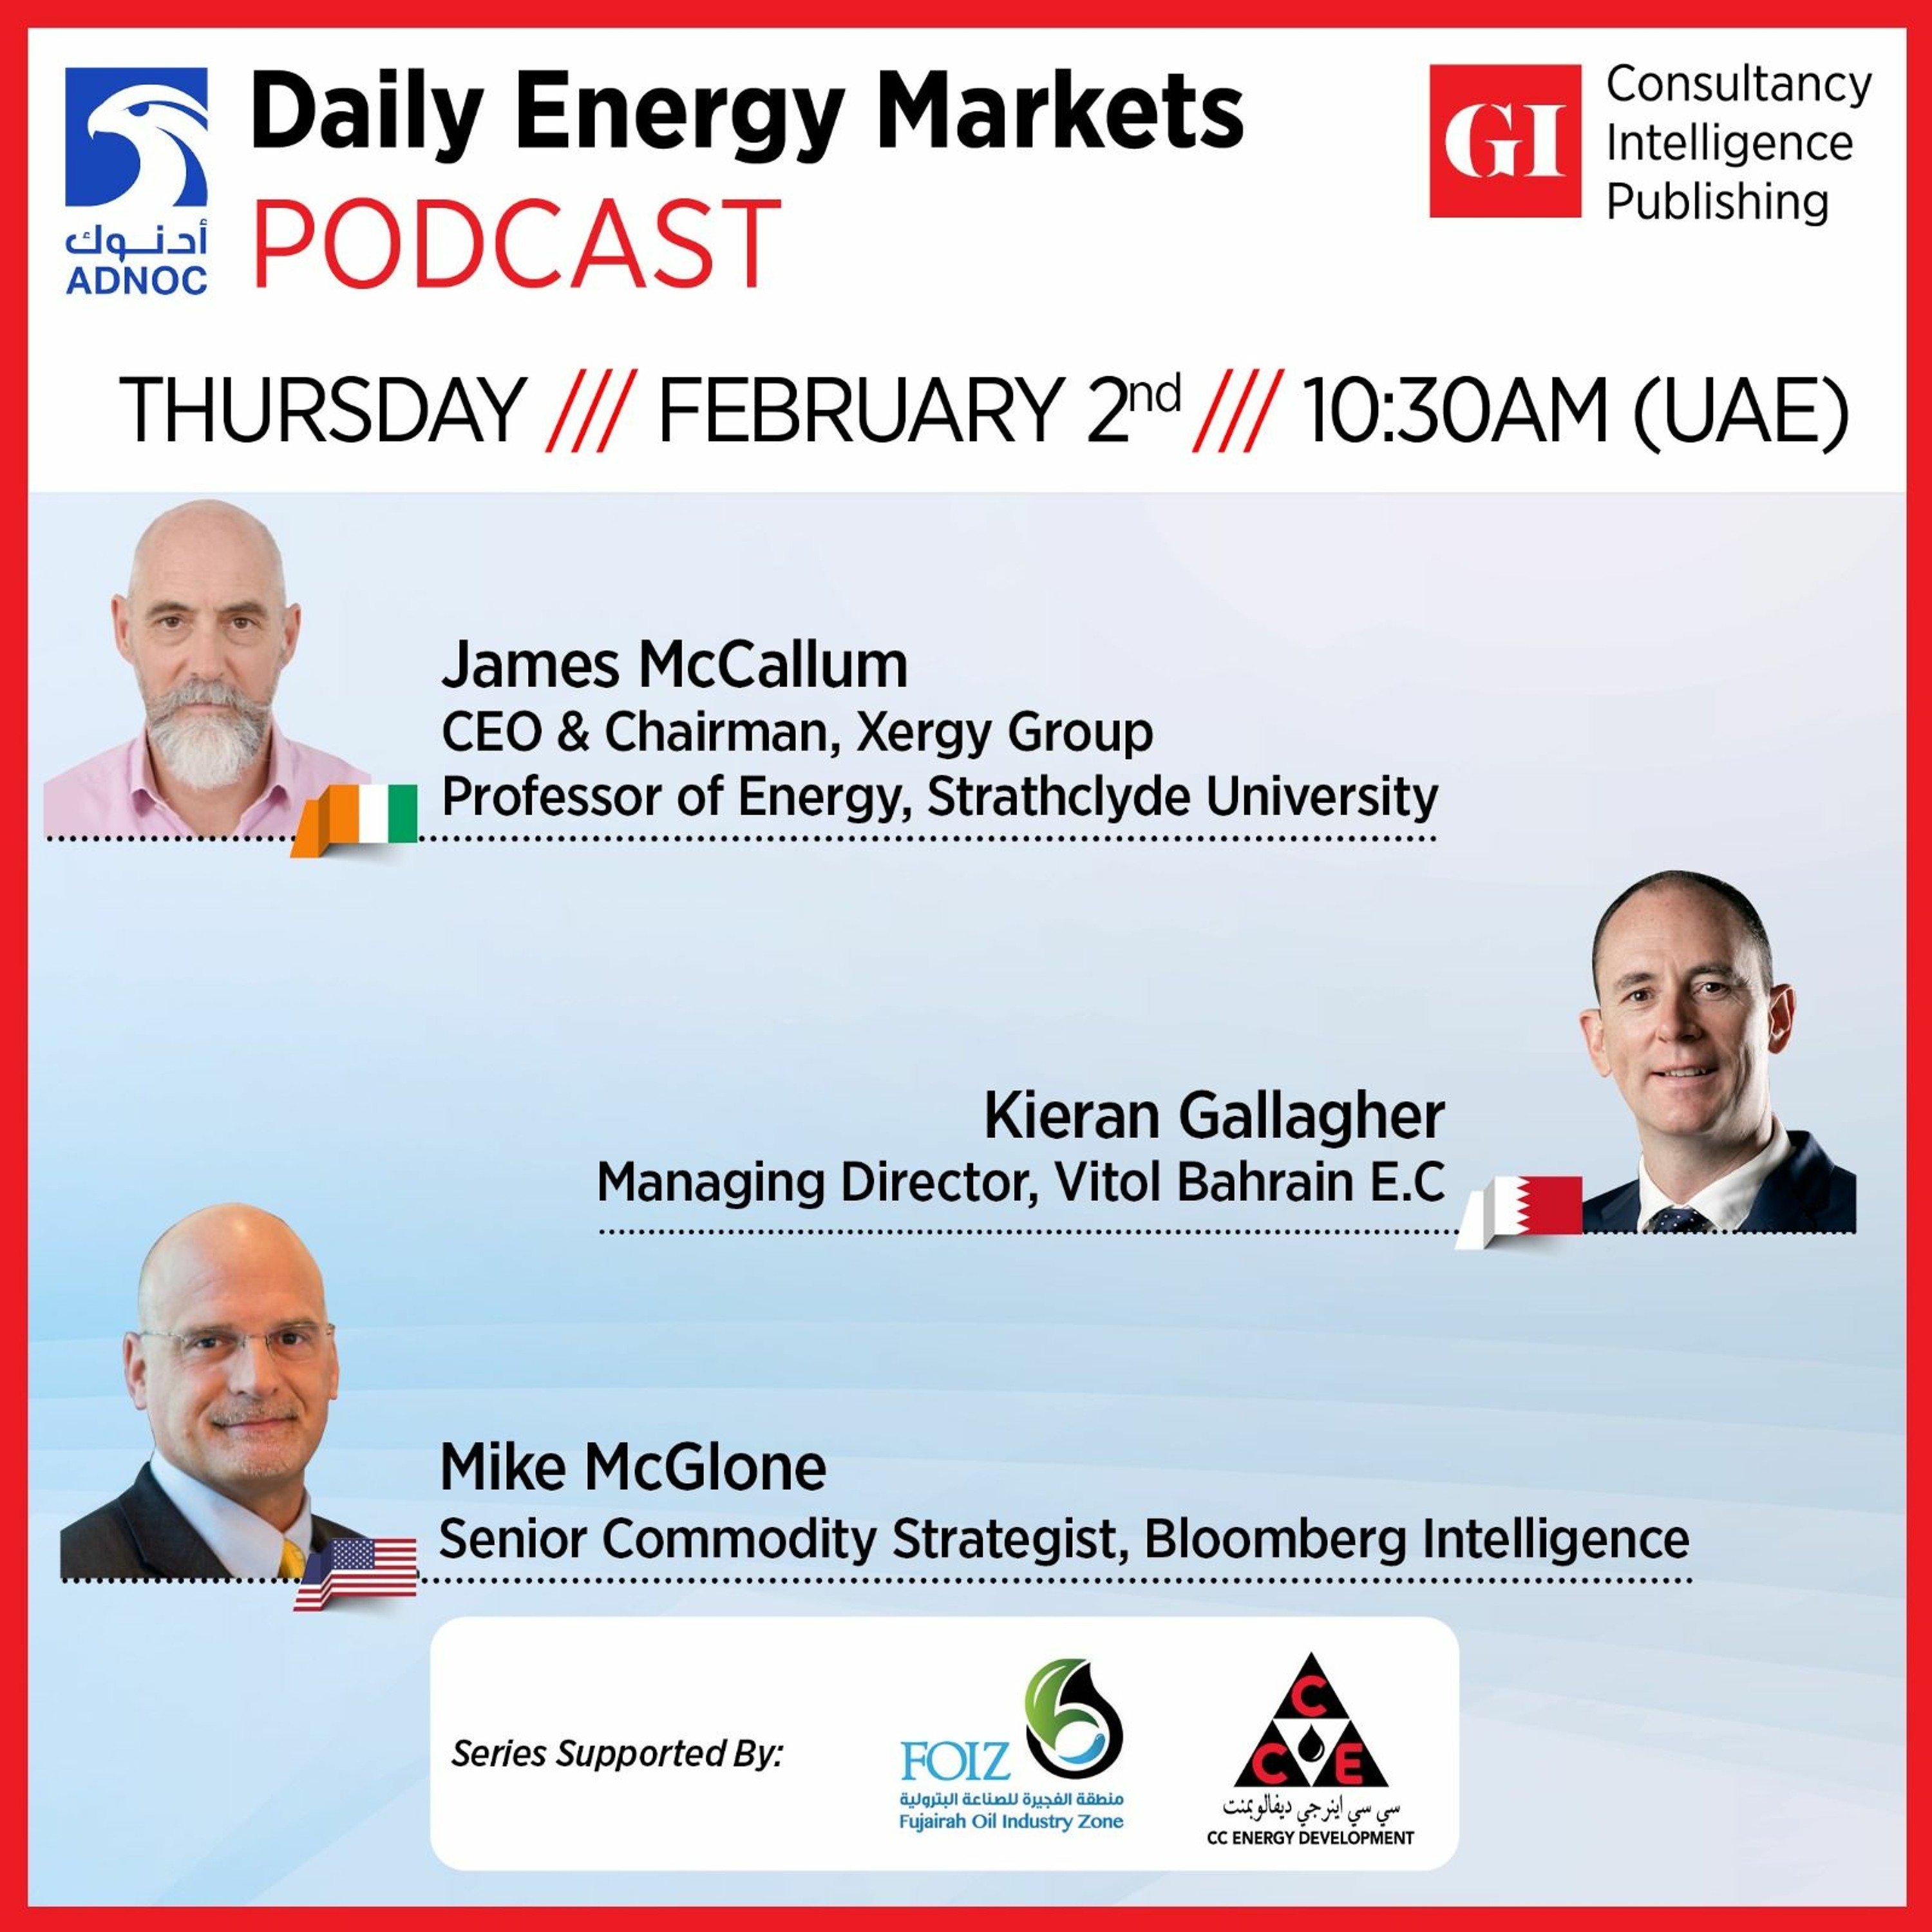 PODCAST: Daily Energy Markets - February 2nd